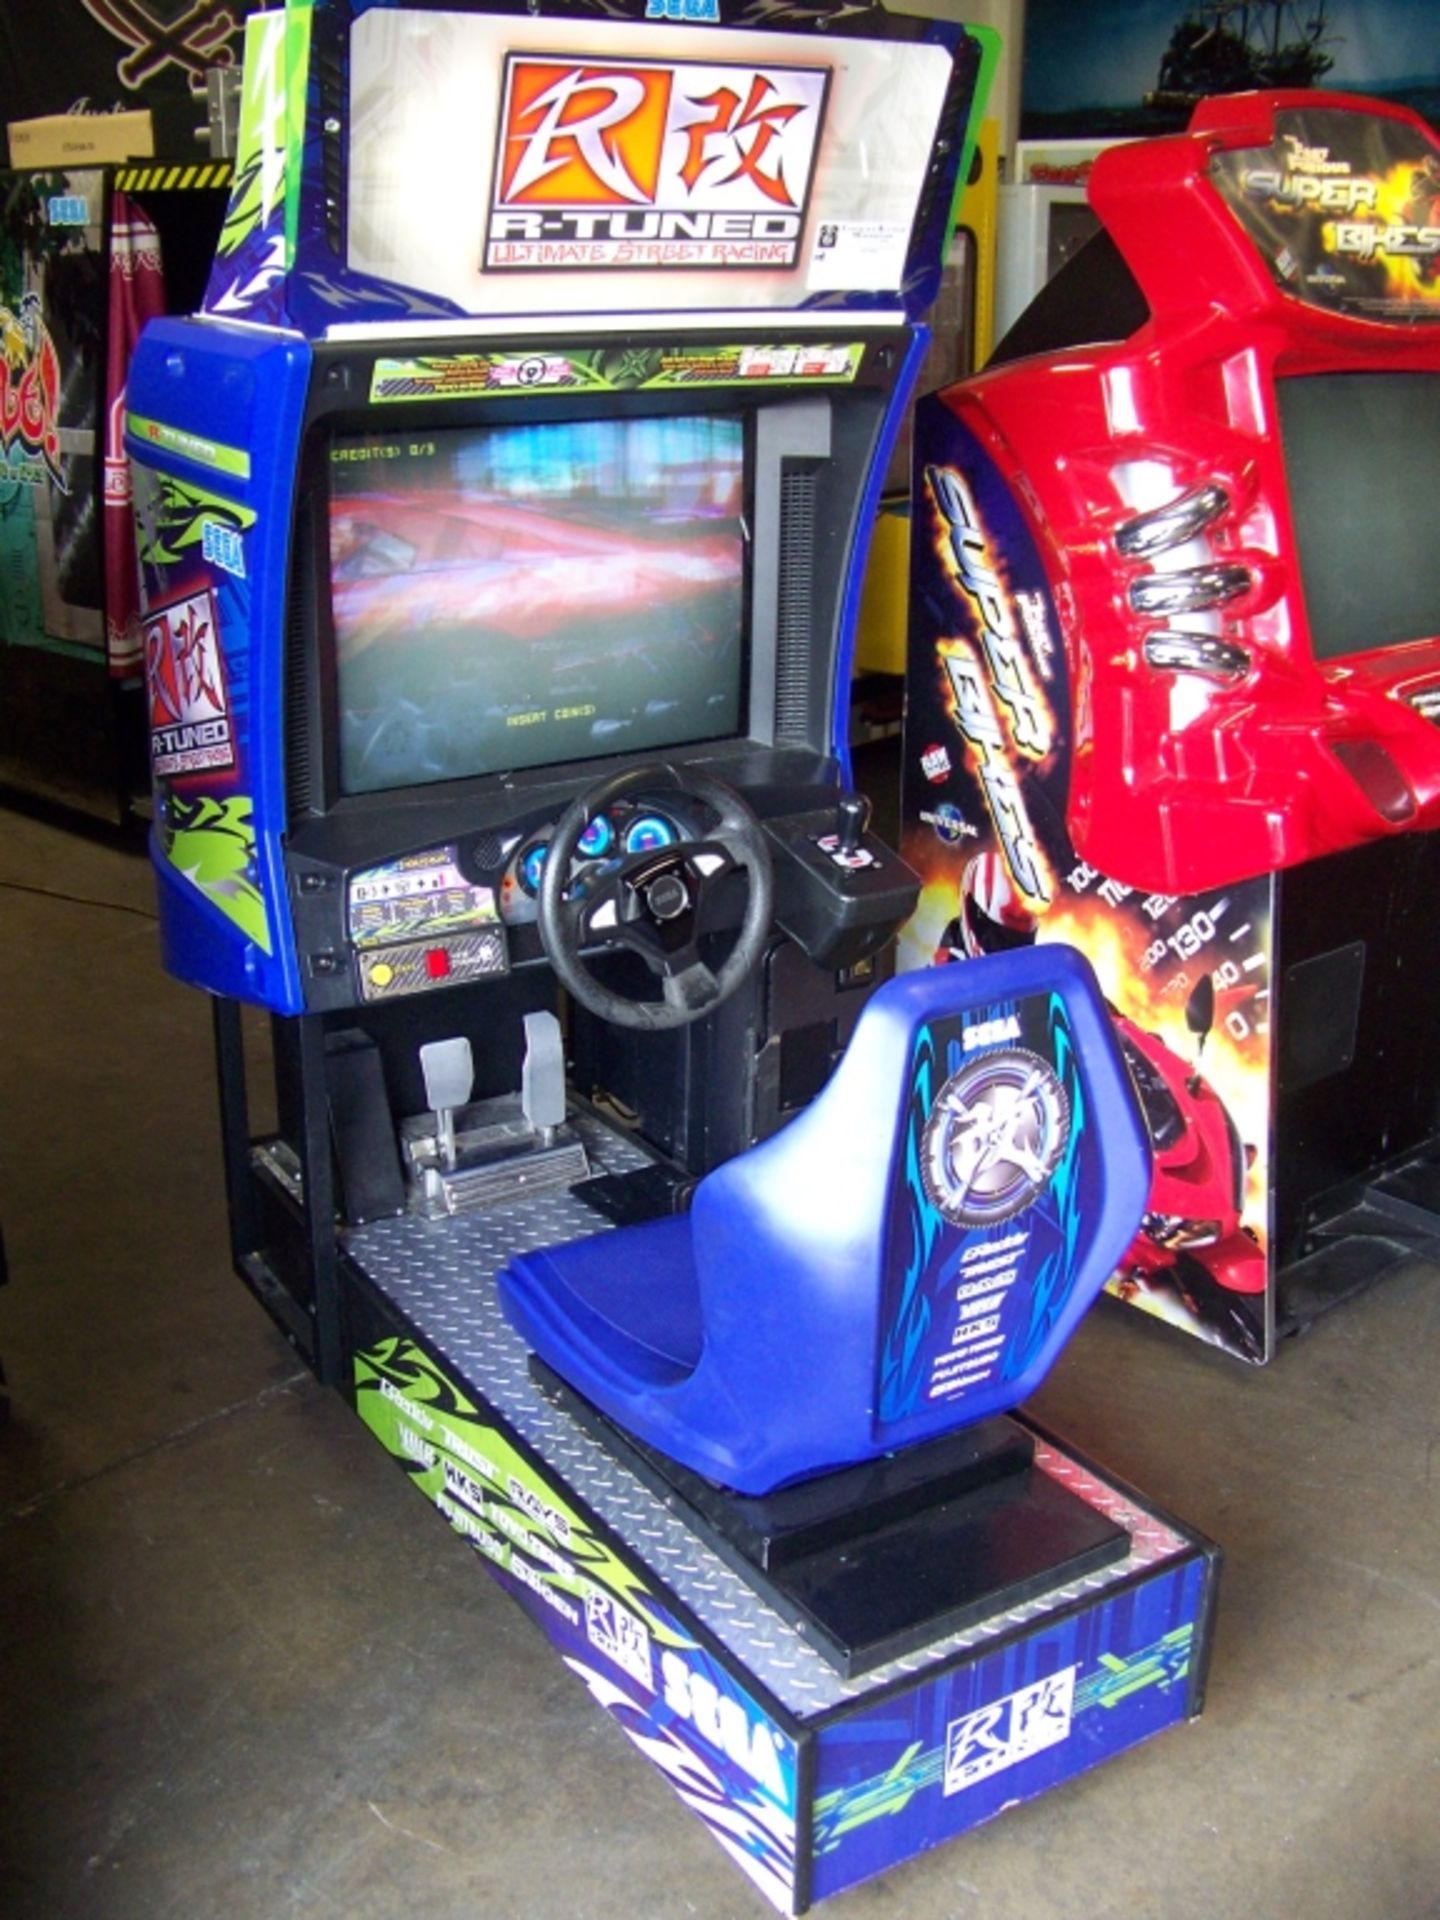 R-TUNED STREET RACING ARCADE GAME SEGA Item is in used condition. Evidence of wear and commercial